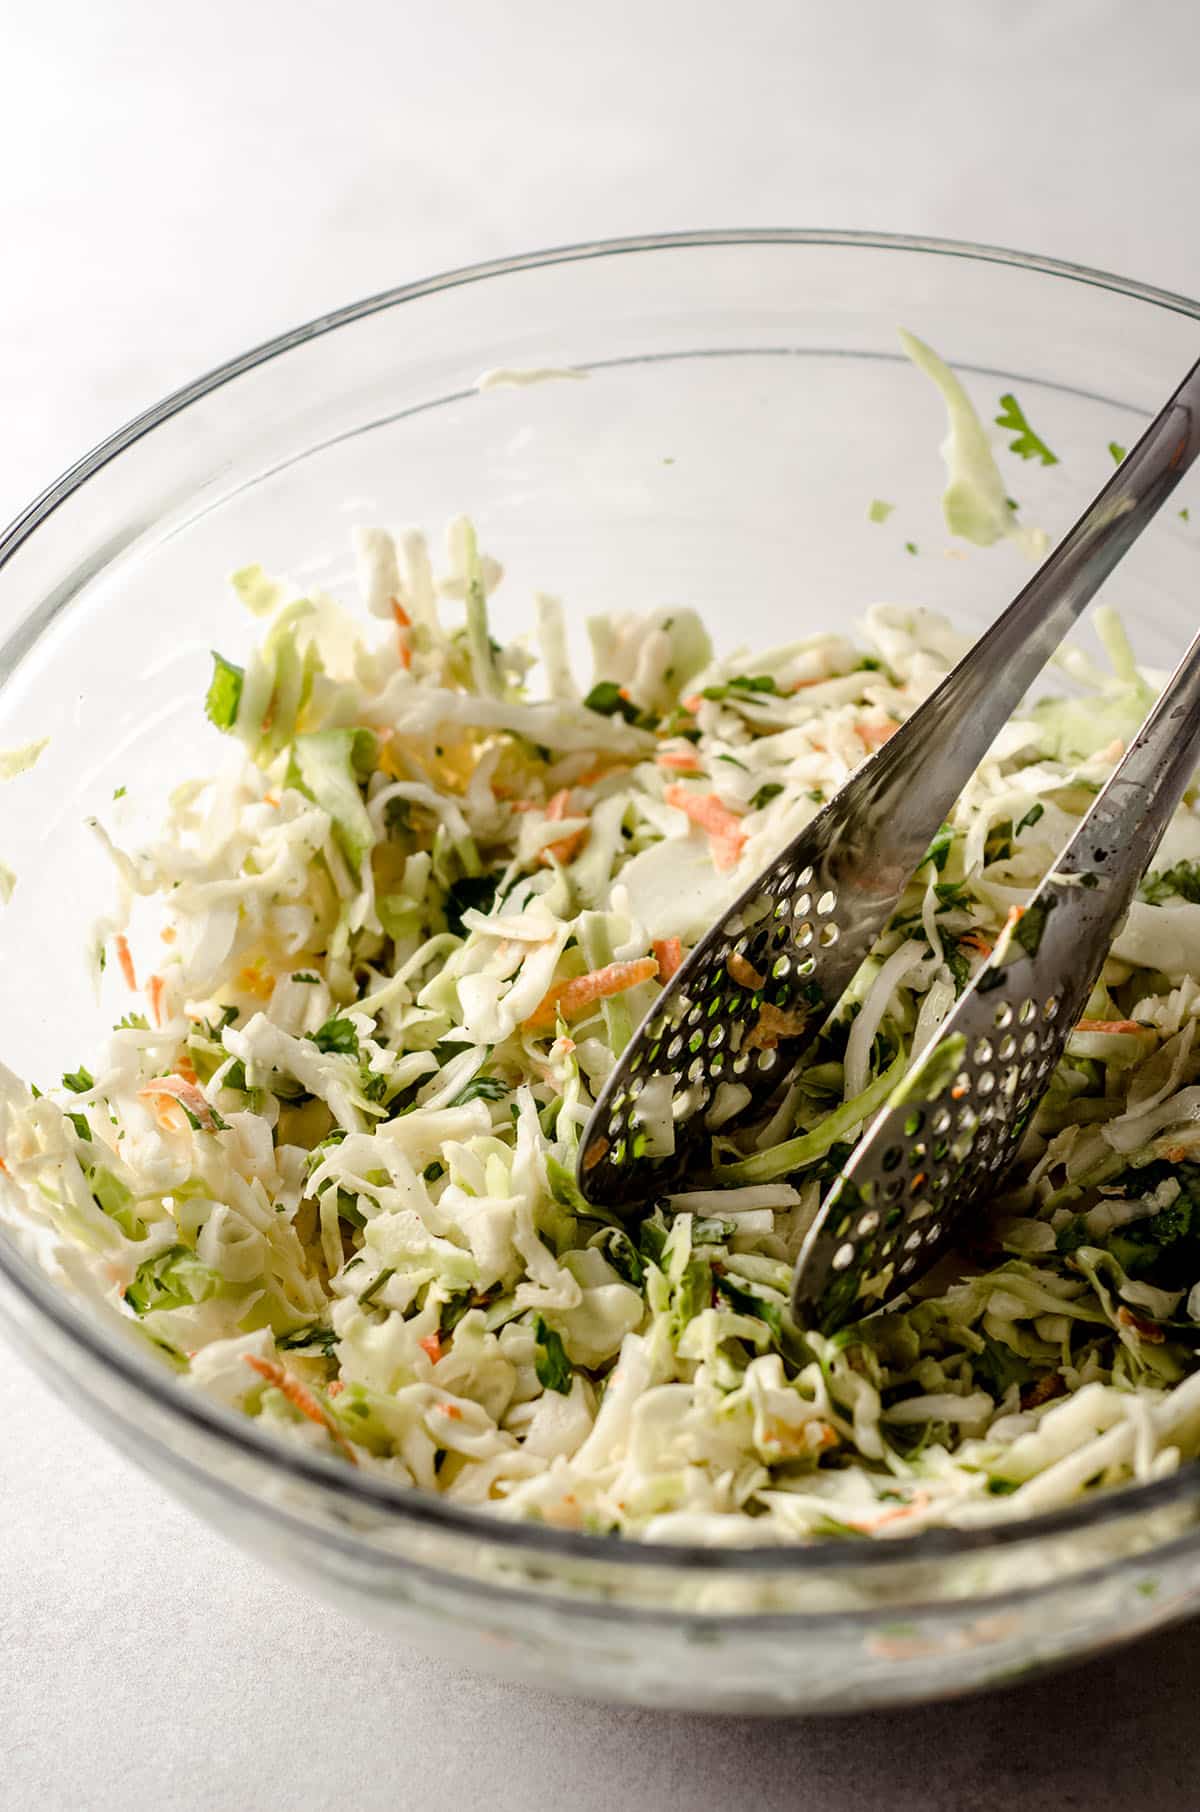 cilantro slaw in a glass bowl with metal tongs for serving